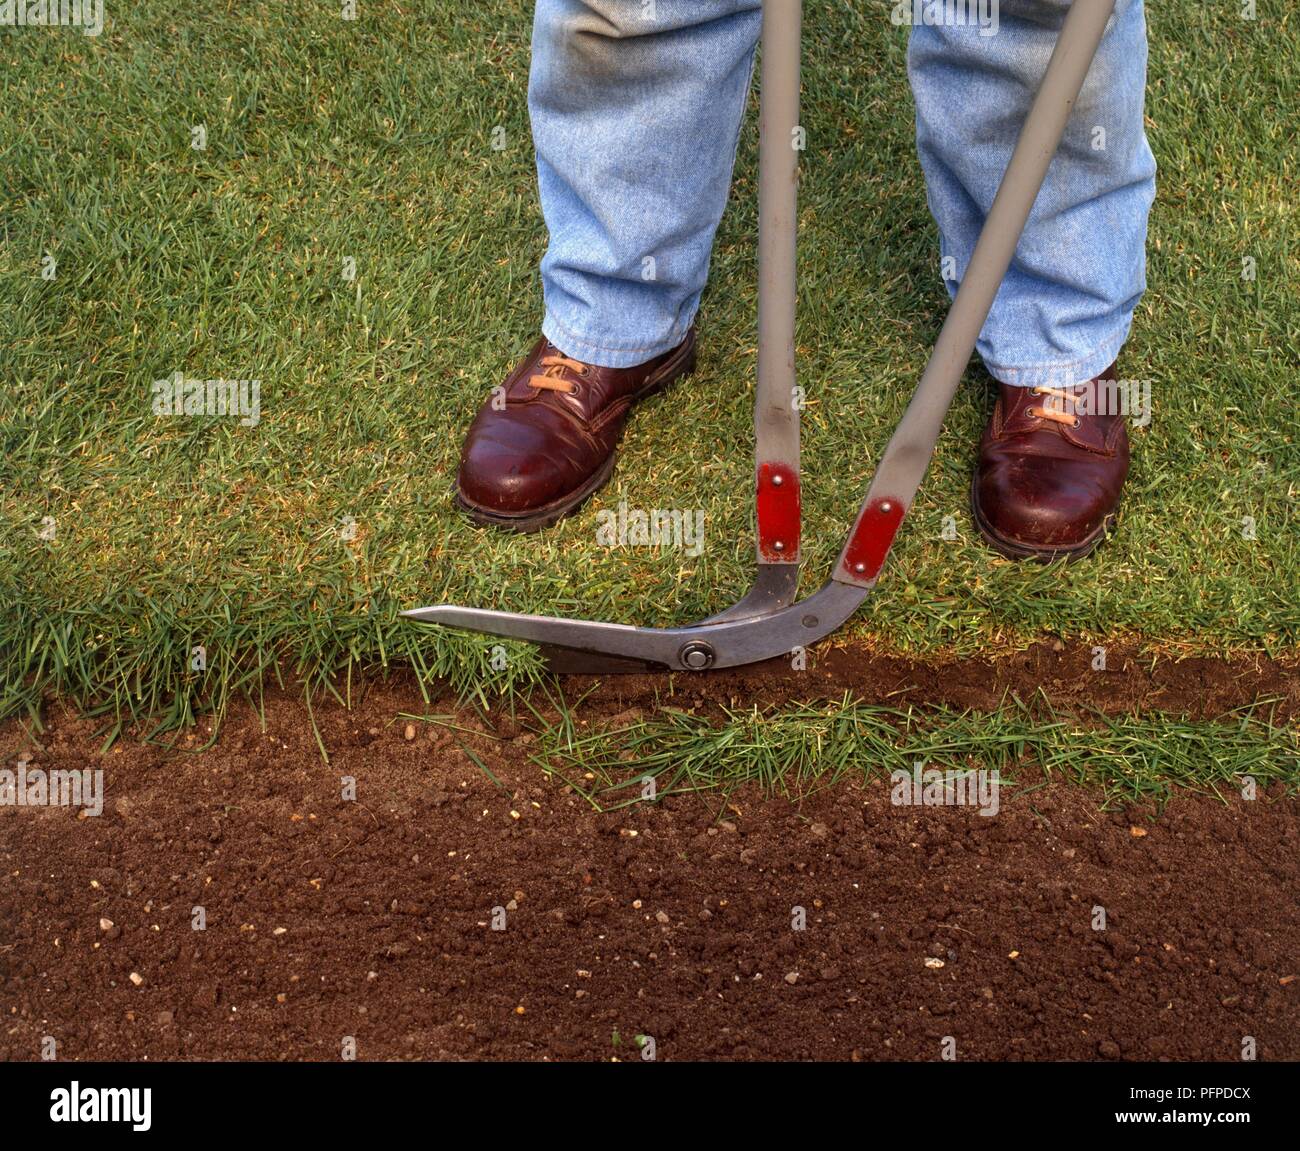 Using long-handled edging shears to trim grass overhanging lawn edge Stock Photo